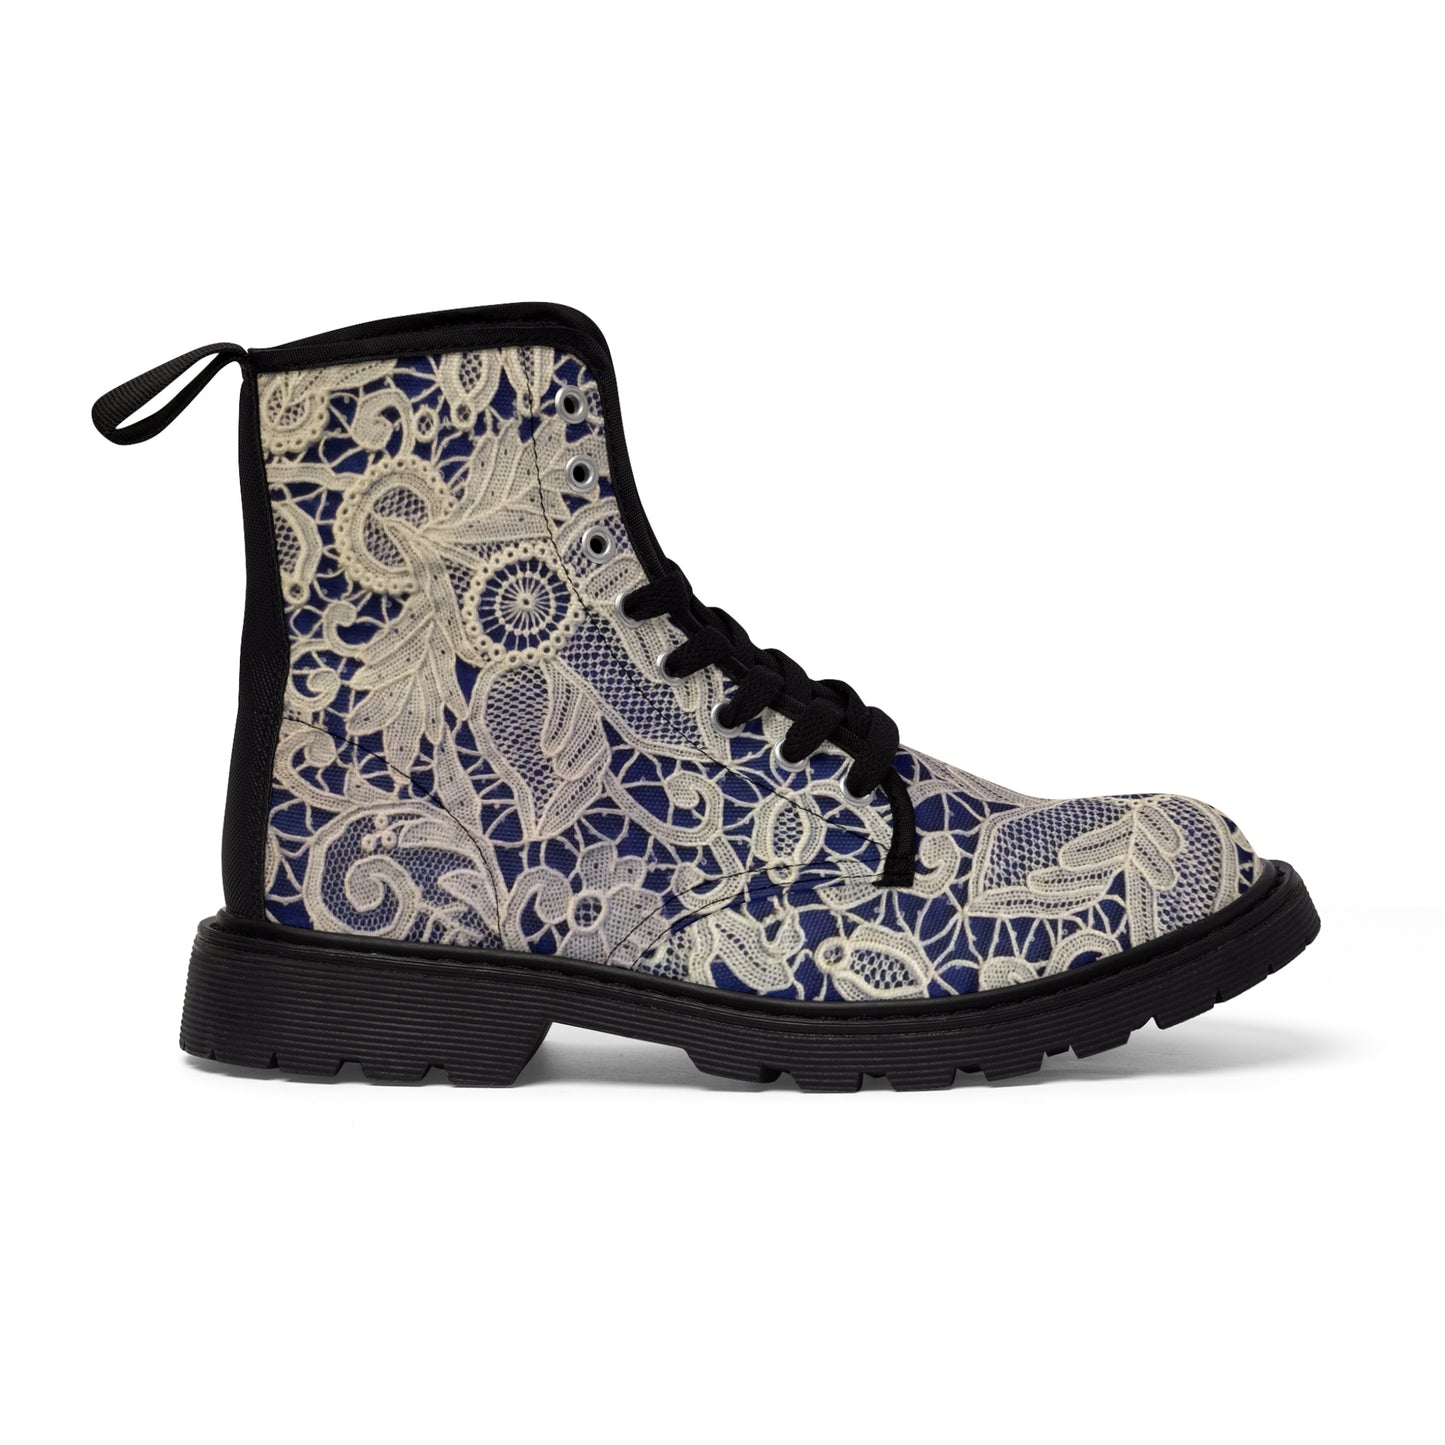 Golden and Blue - Inovax Men's Canvas Boots